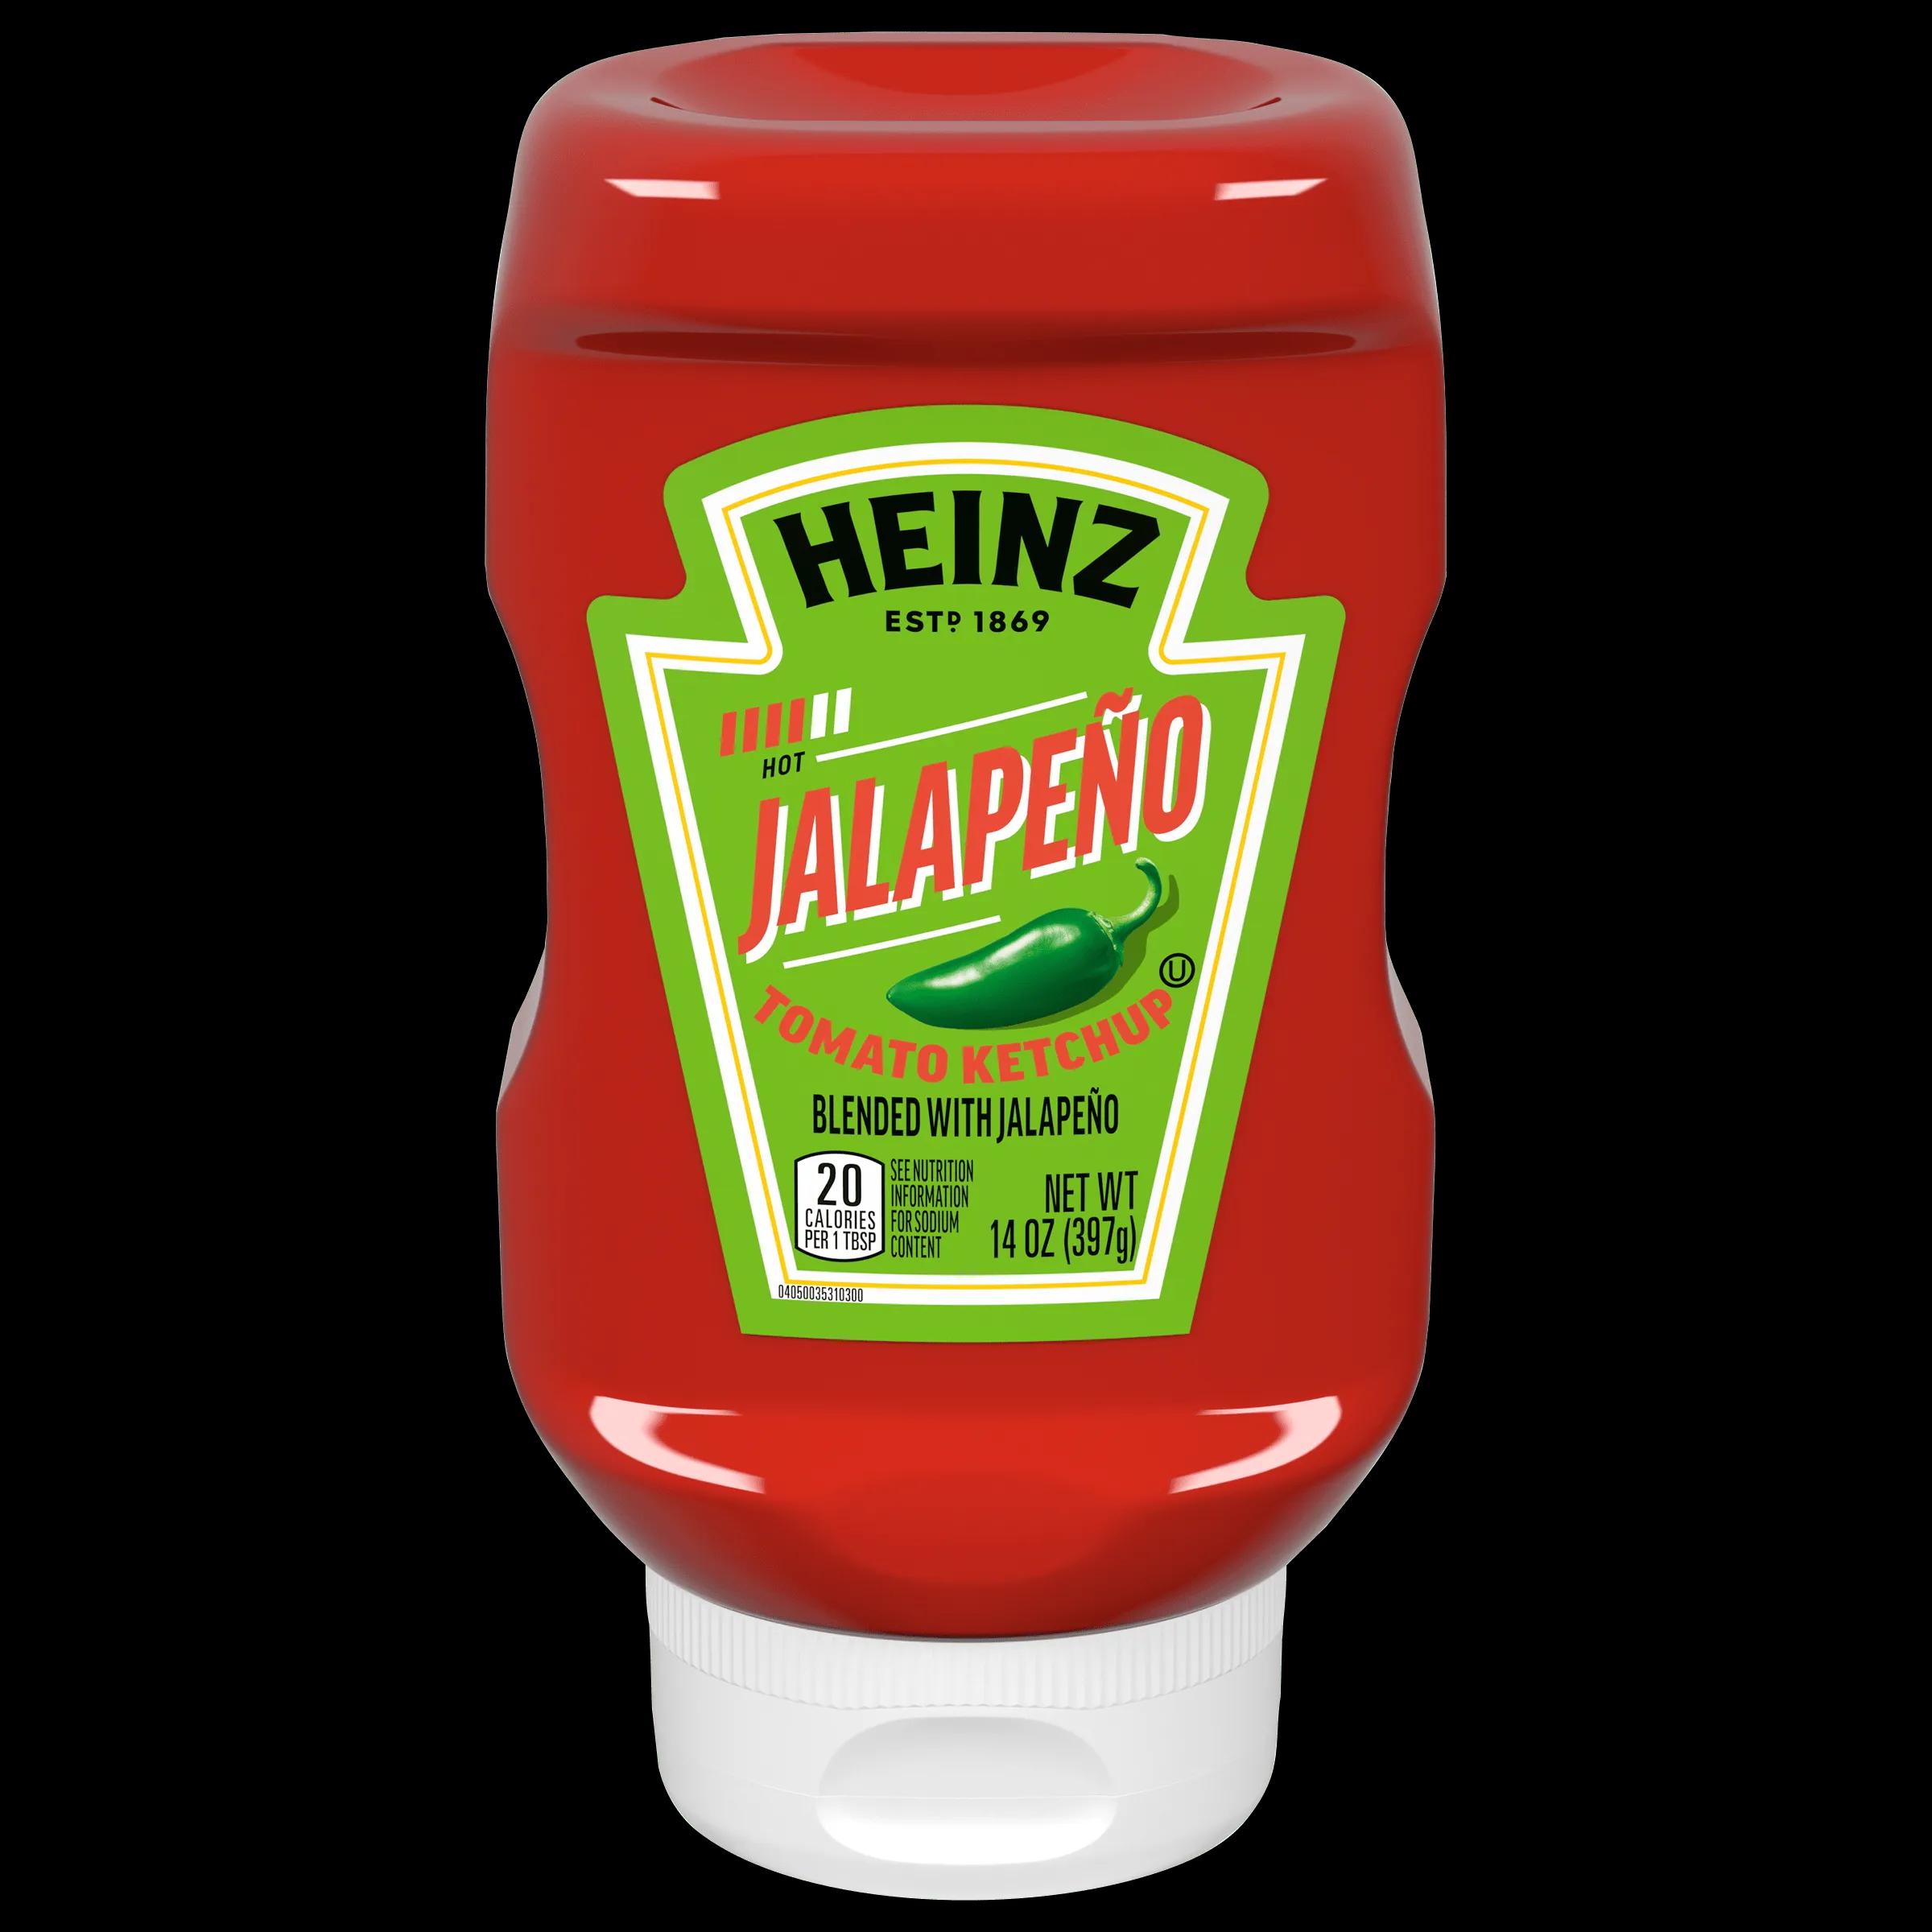 Jalapeno Tomato Ketchup Blended with Jalapeno - Products - Heinz®